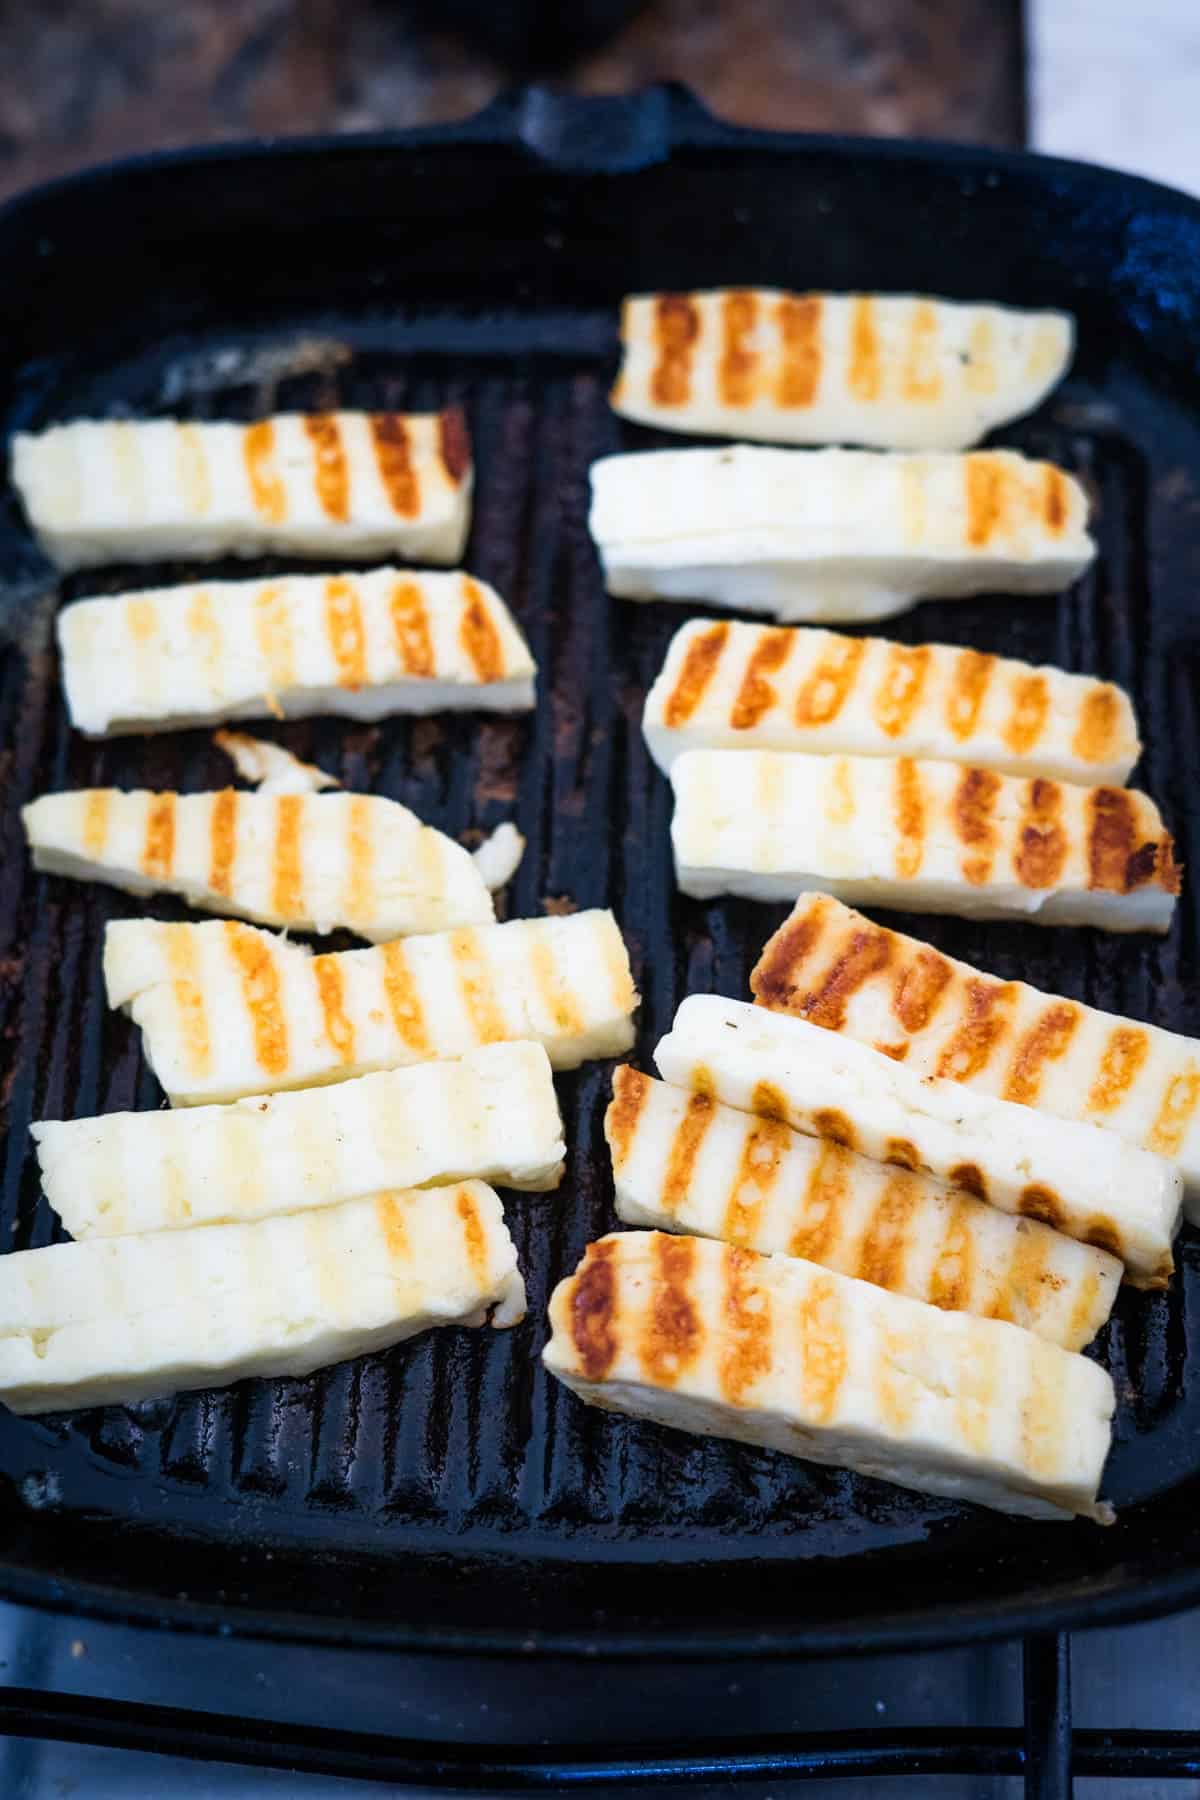 Grilled halloumi cheese slices with grill marks on a black grill pan, served with chicken salad.